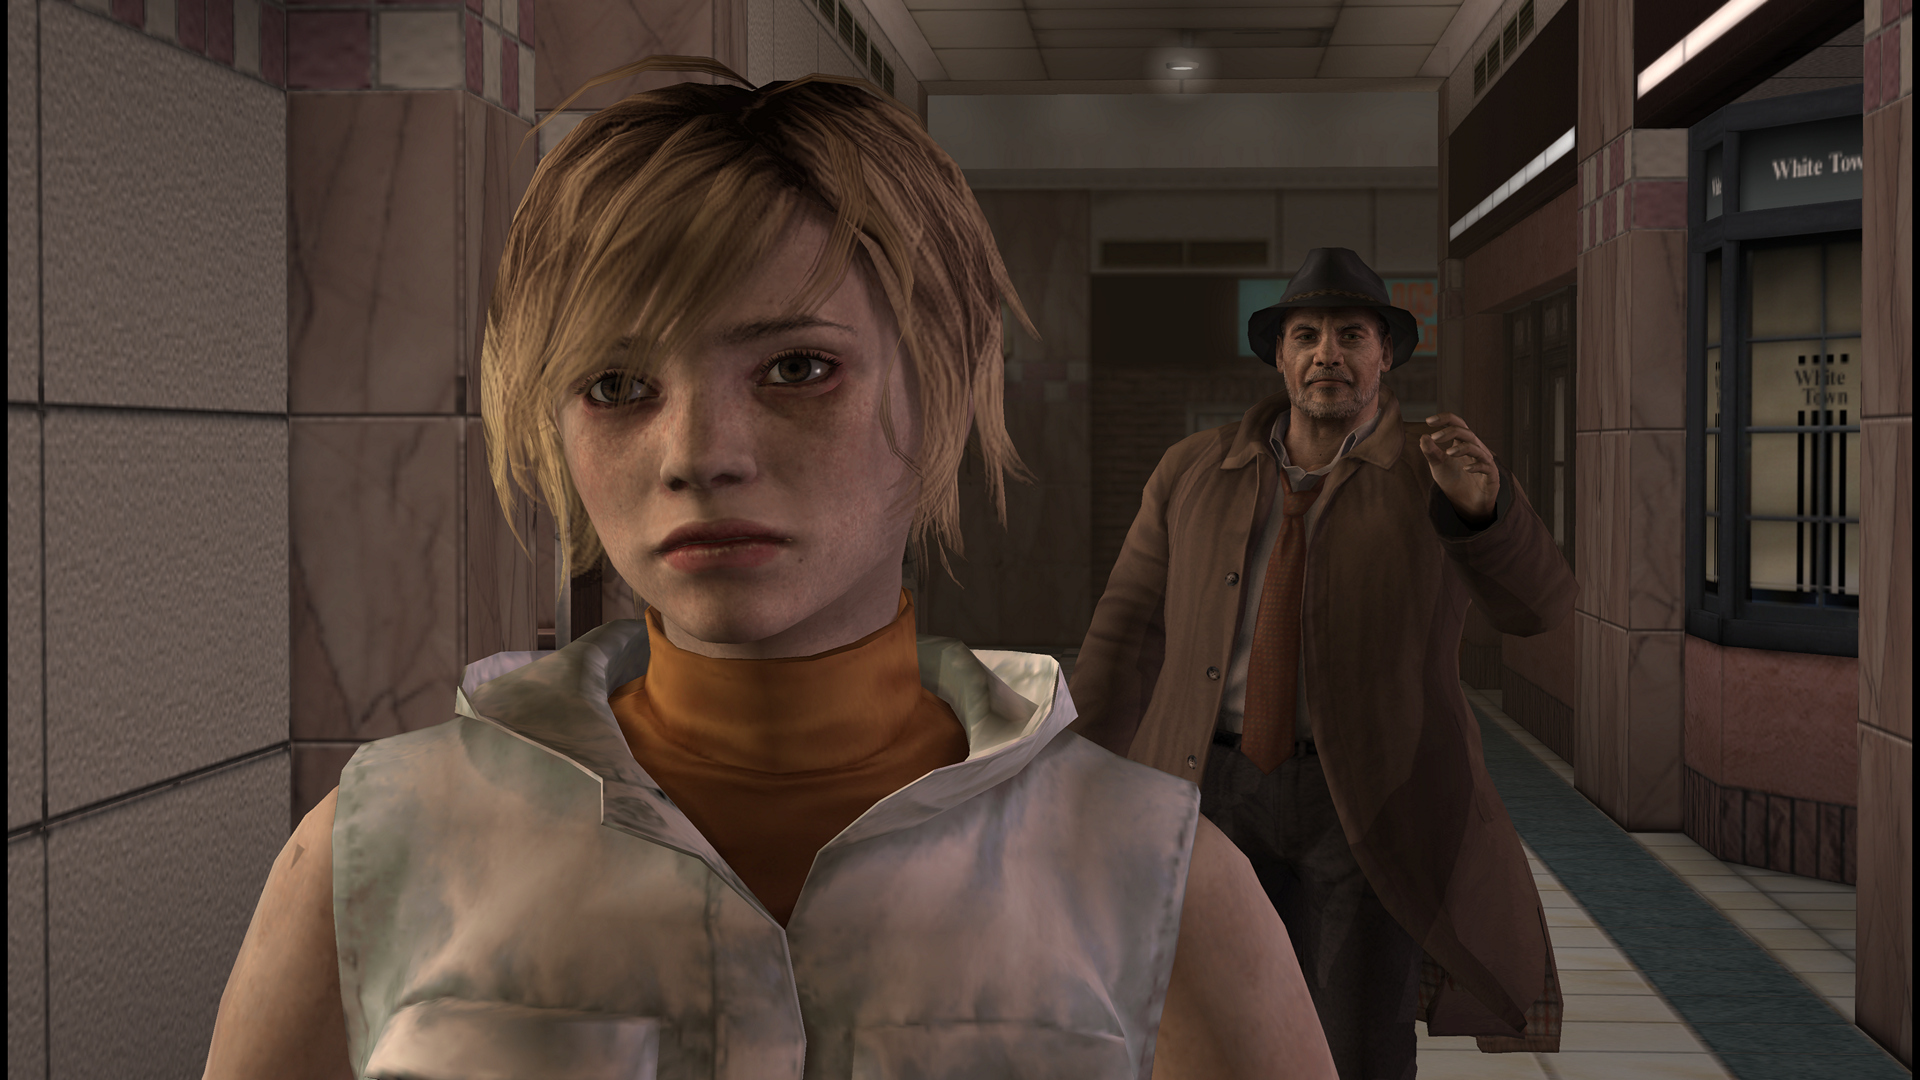 Video Game silent Hill 3. playstation 